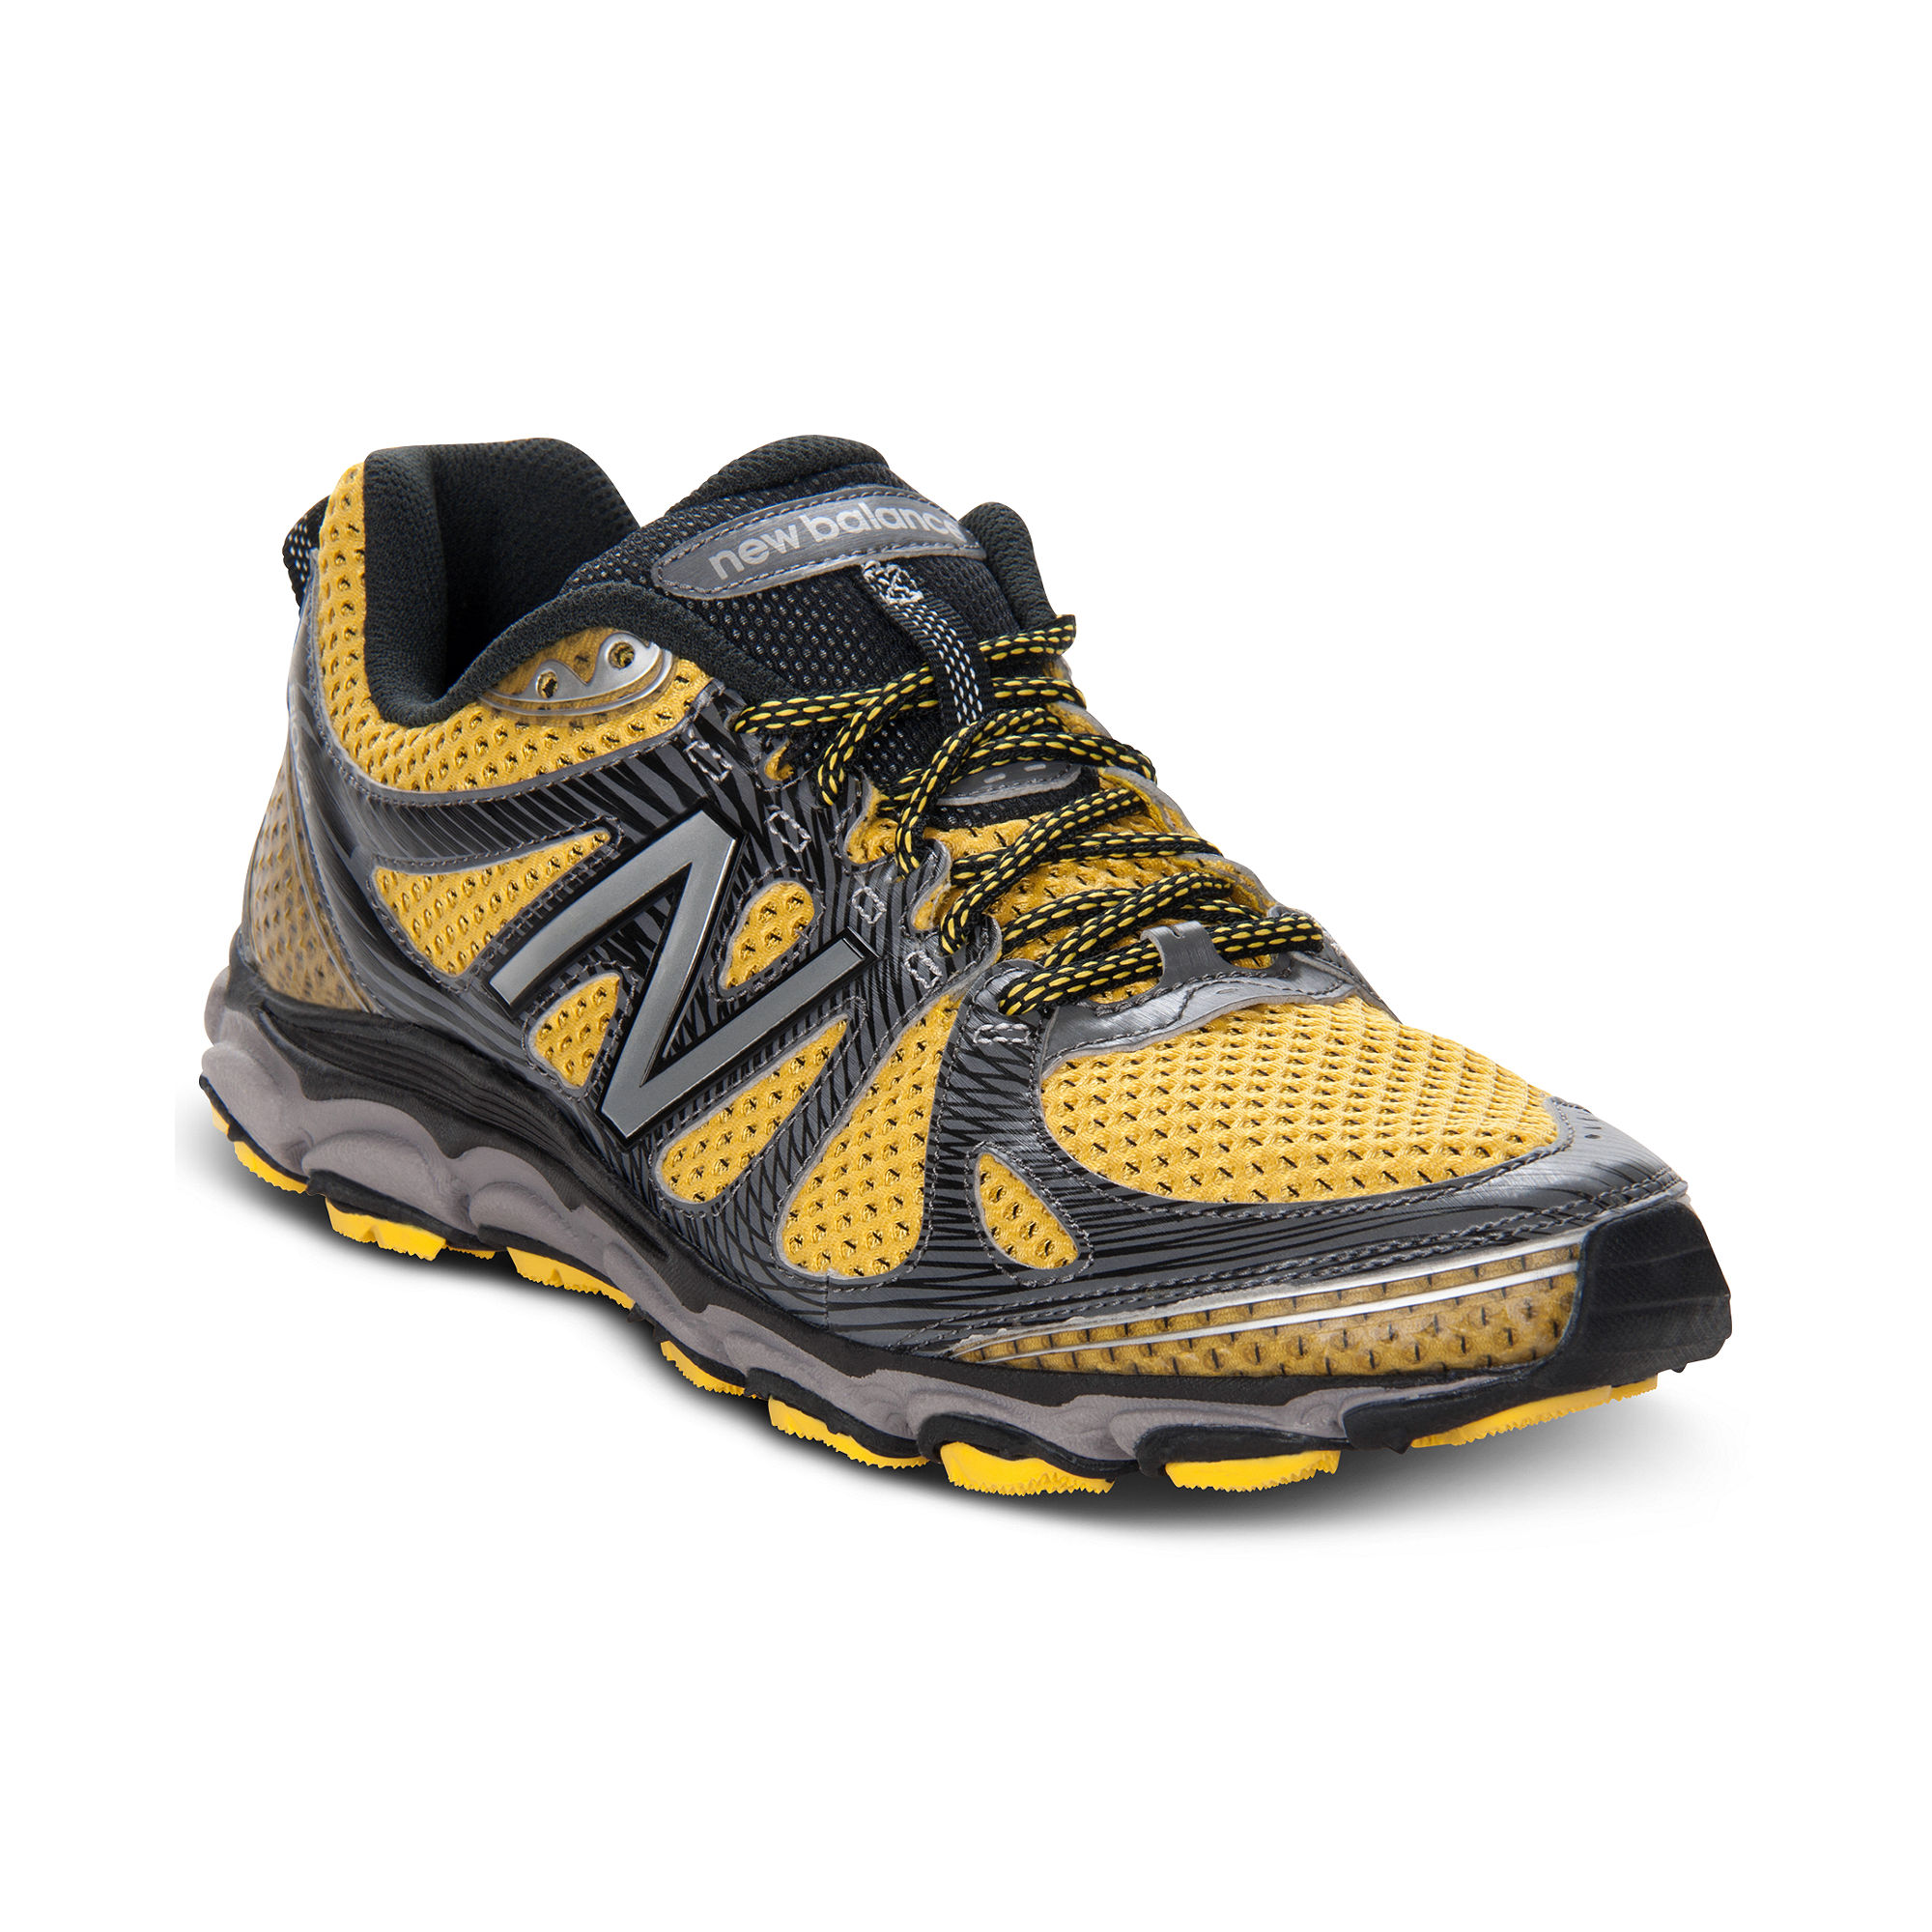 New Balance 810 Sneakers in Grey/Yellow (Yellow) for Men - Lyst